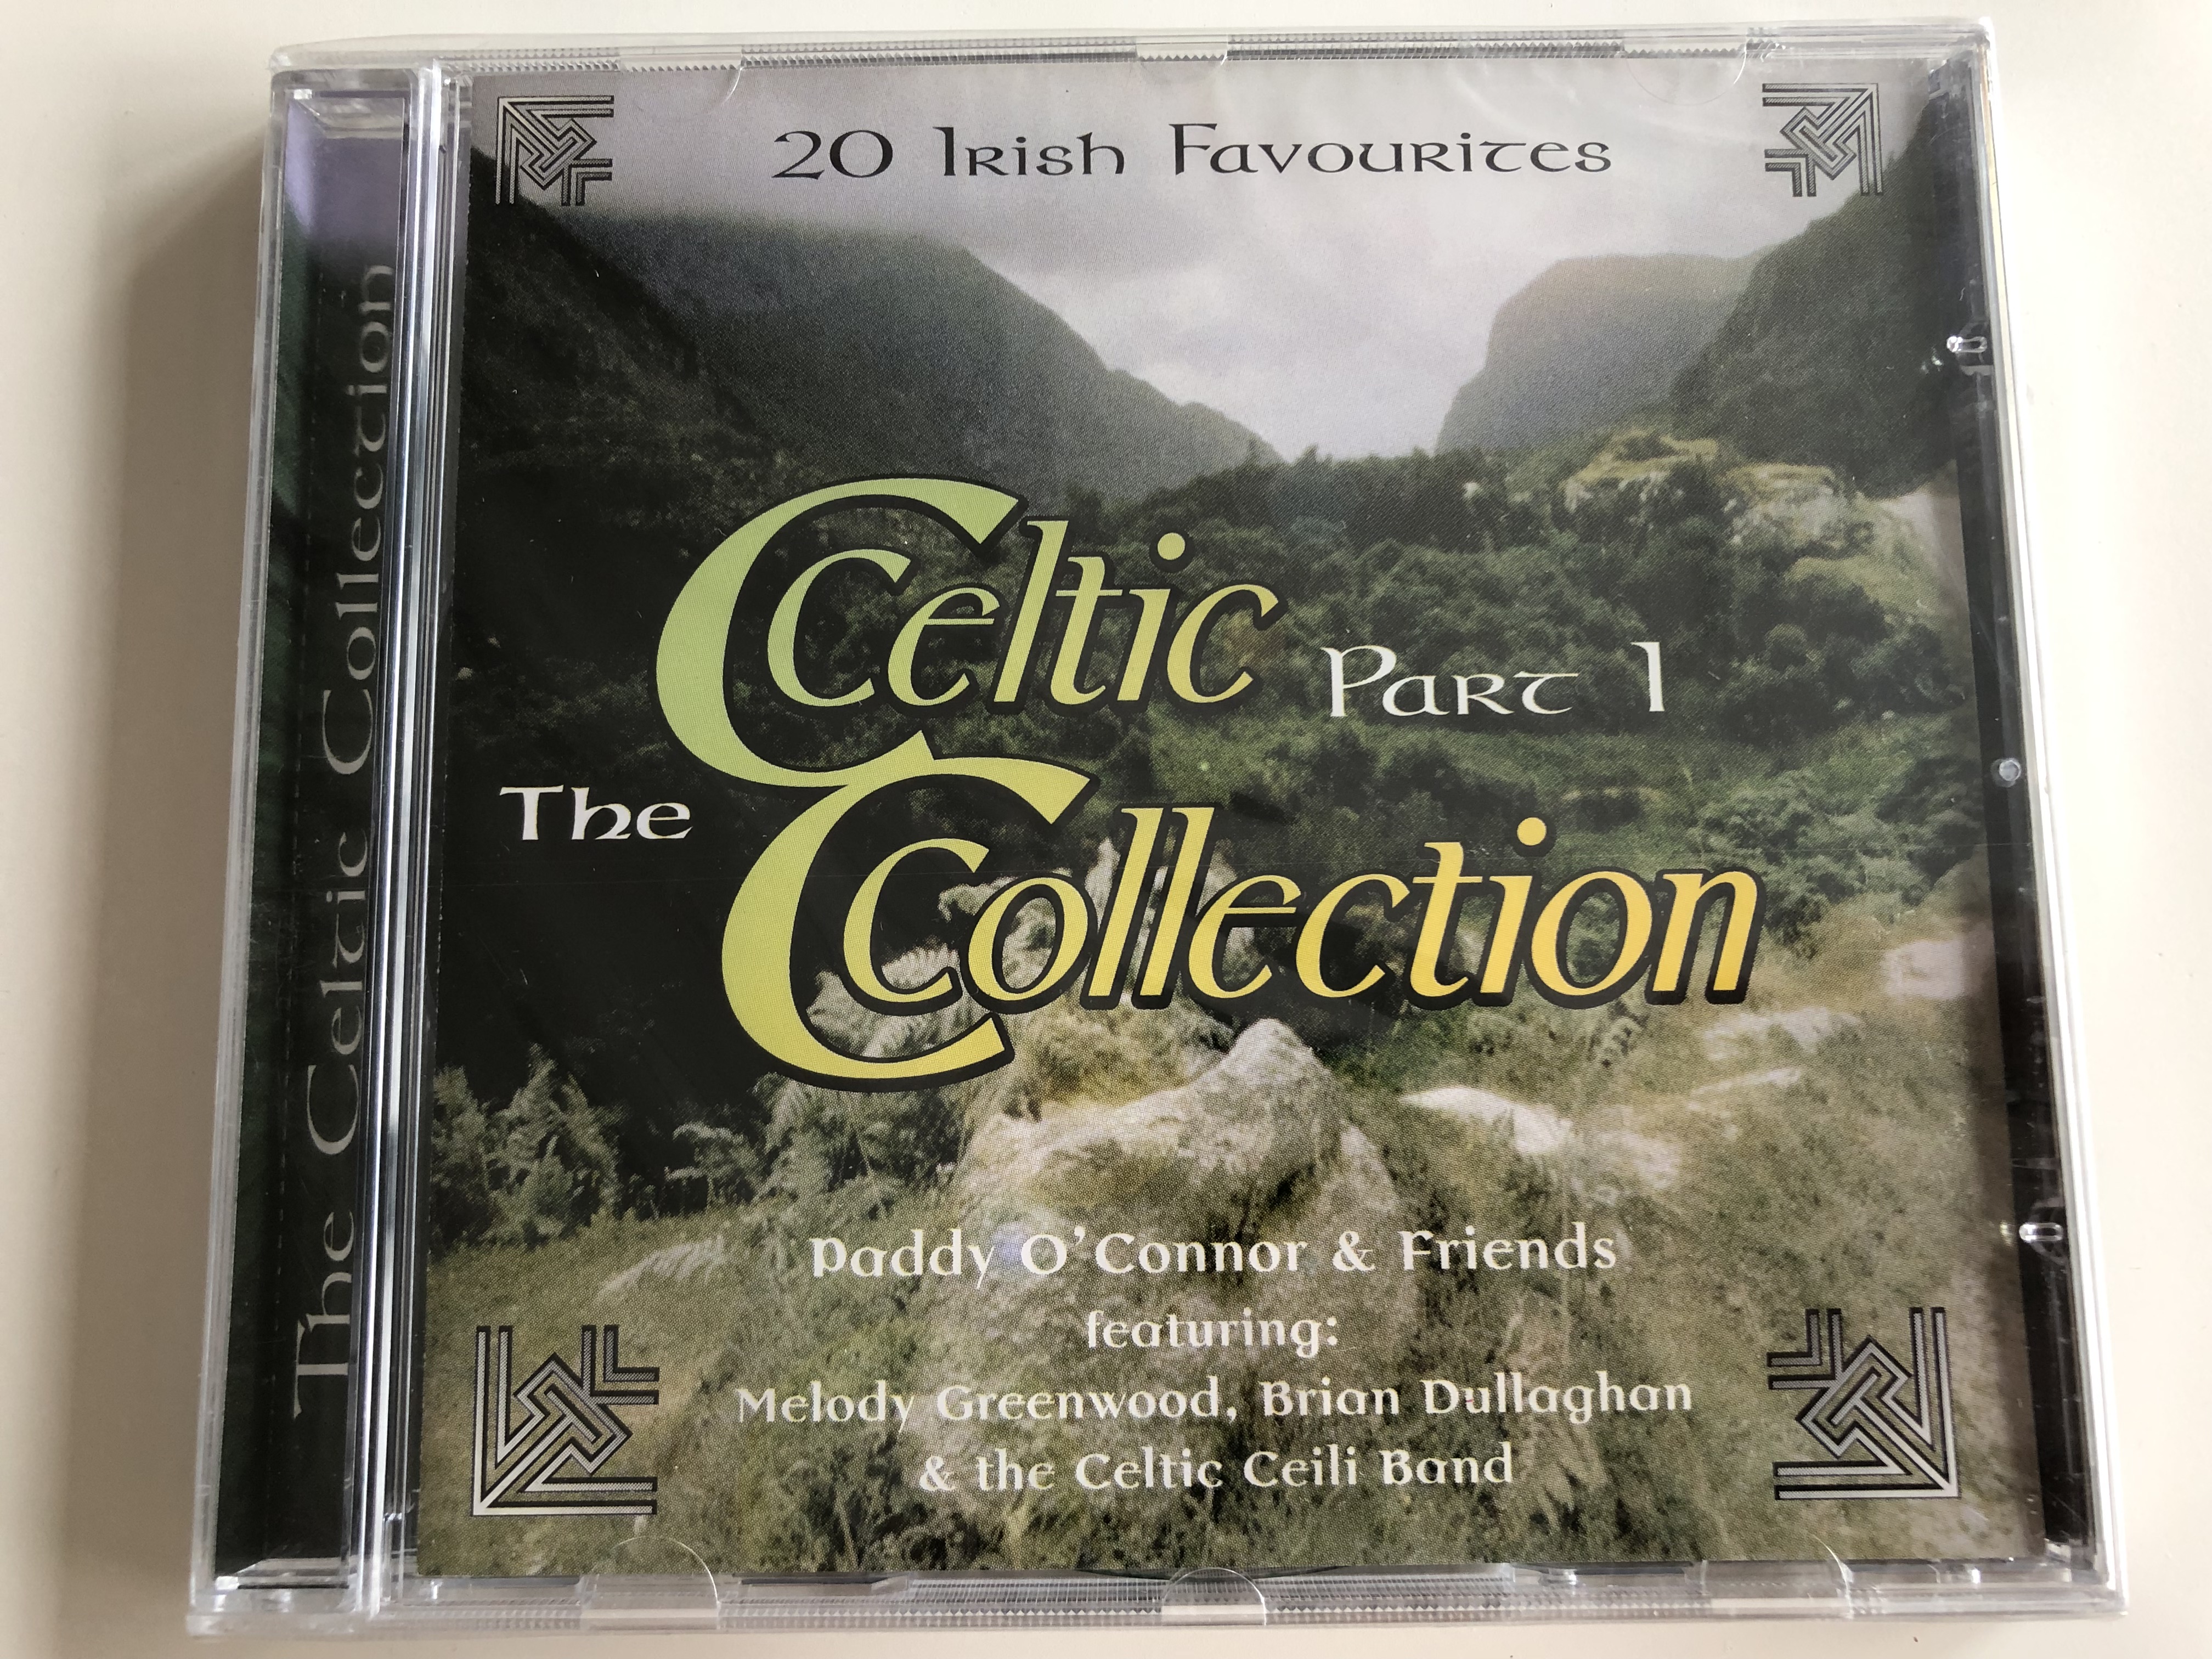 the-celtic-collection-part-1-20-irish-favourites-paddy-o-connor-friends-featuring-melody-greenwood-brian-dullaghan-the-celtic-ceili-band-1-.jpg